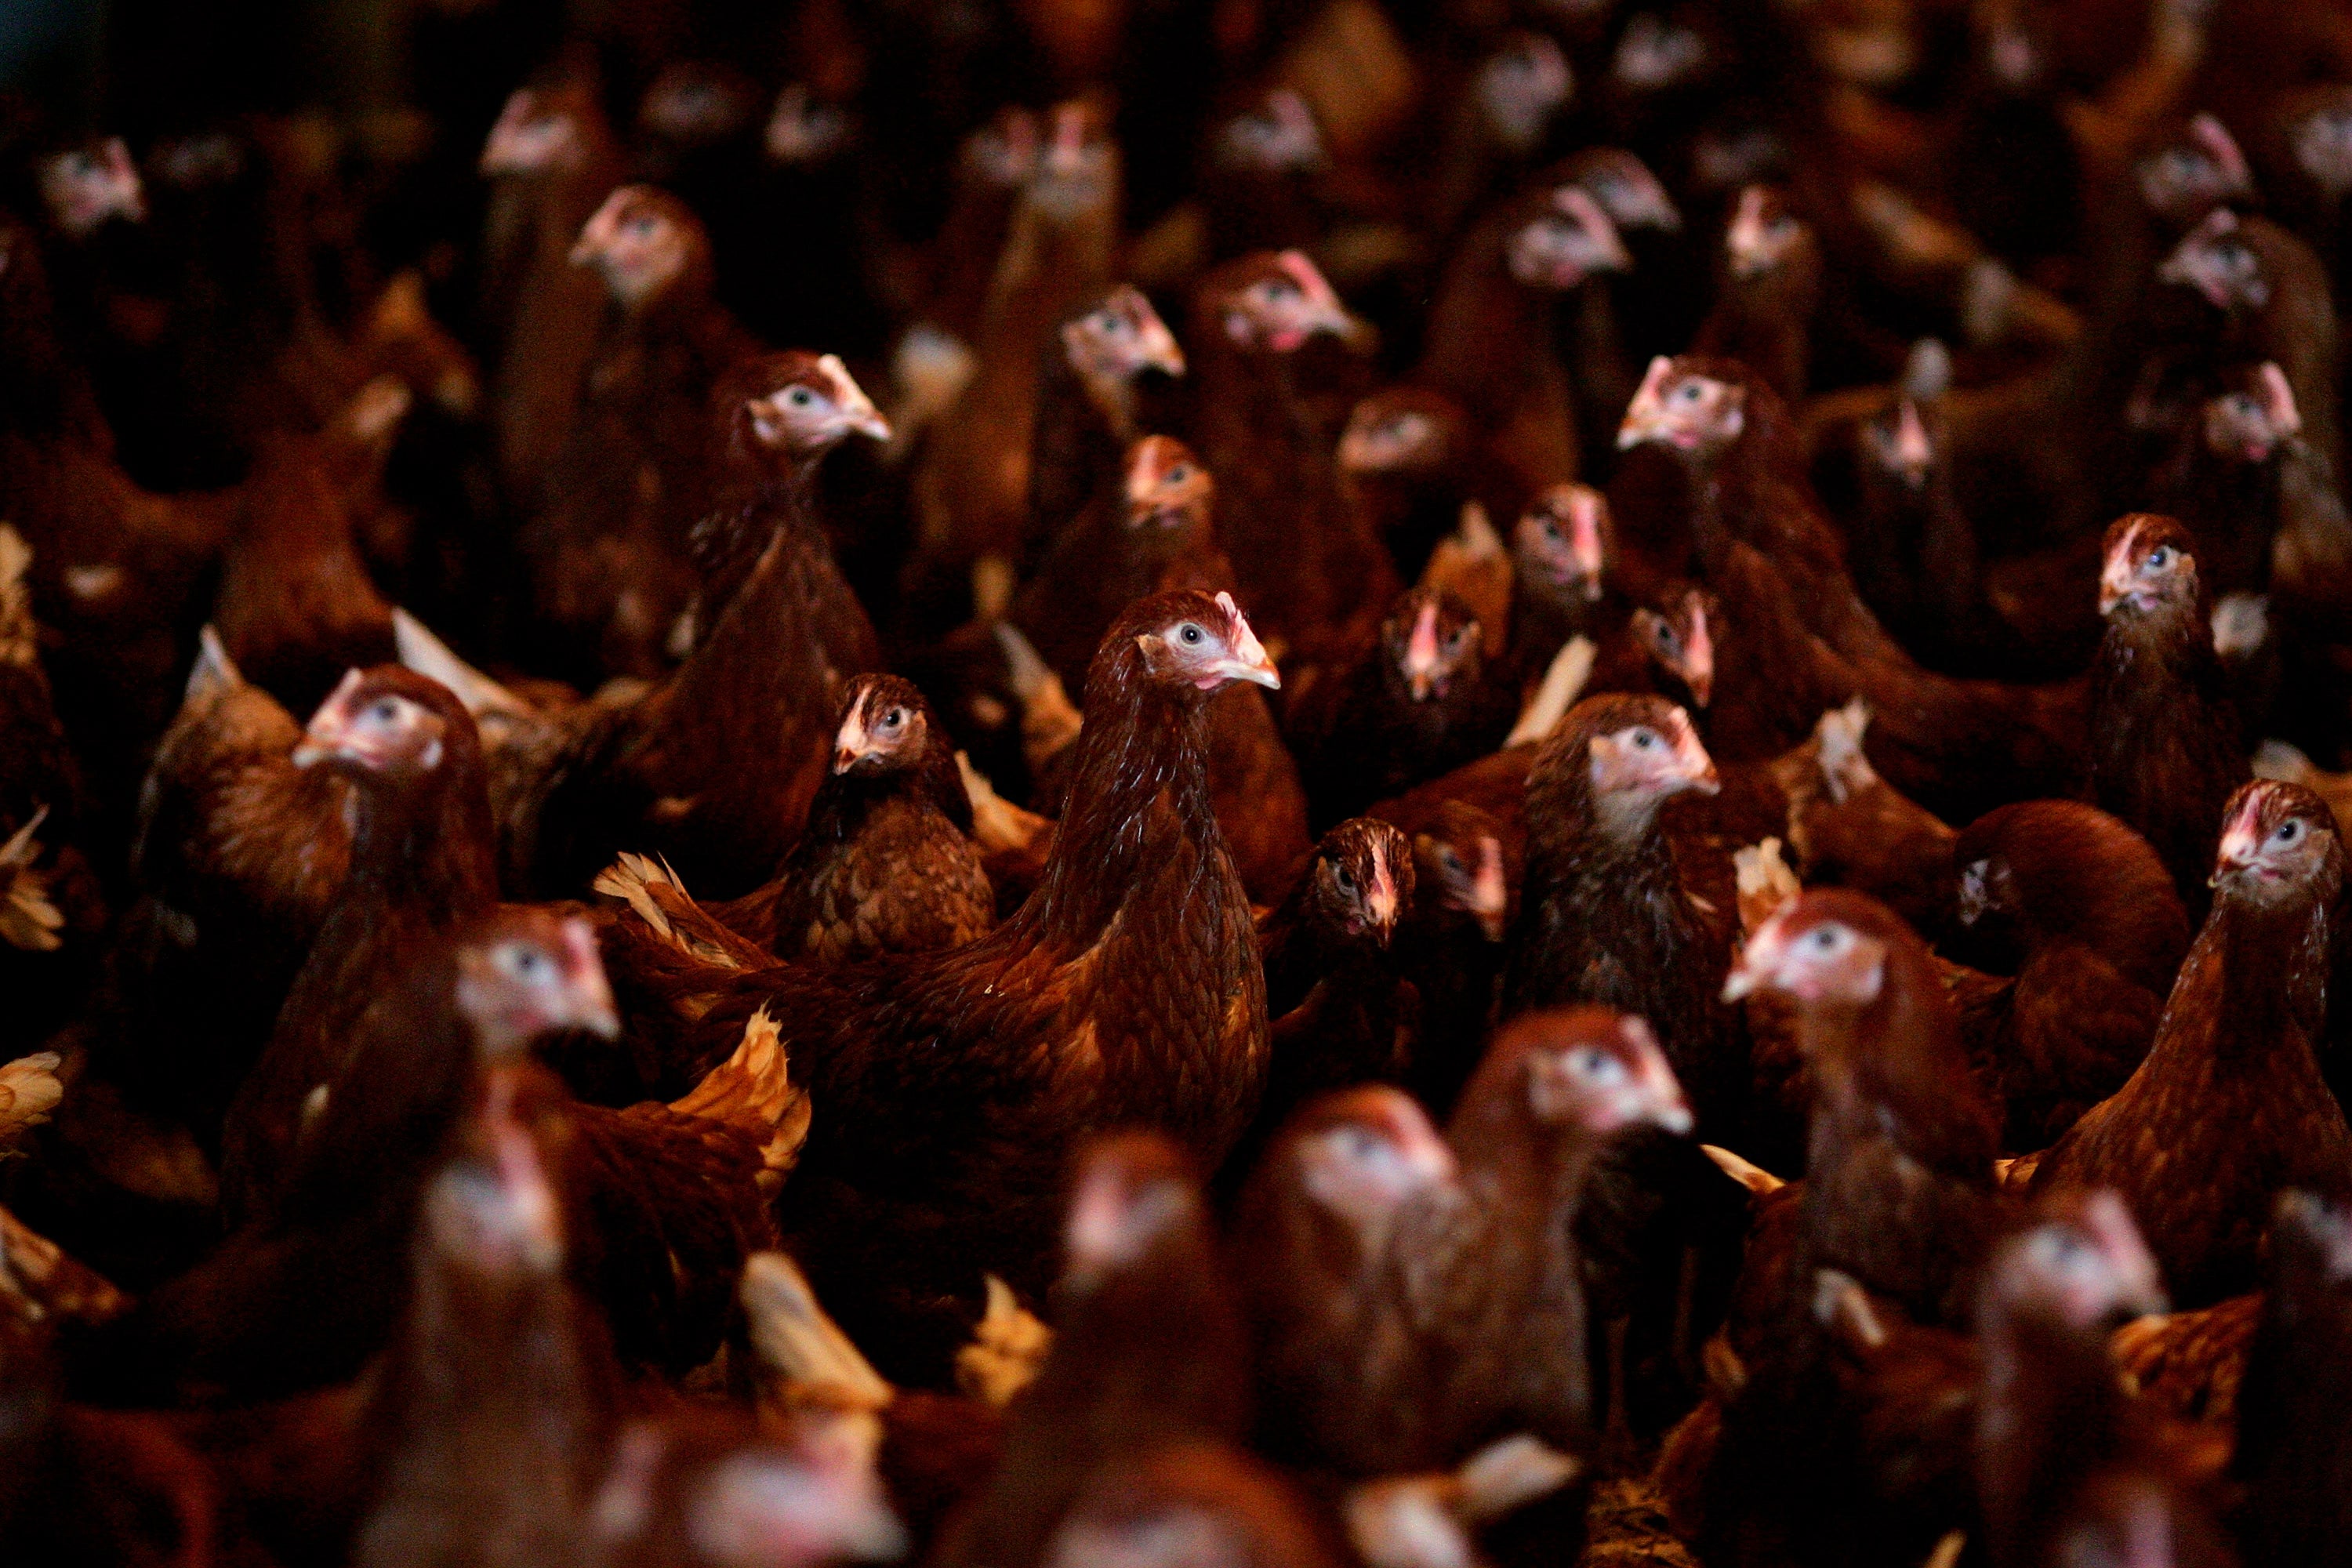 Cases of avian flu have also been found in England this year